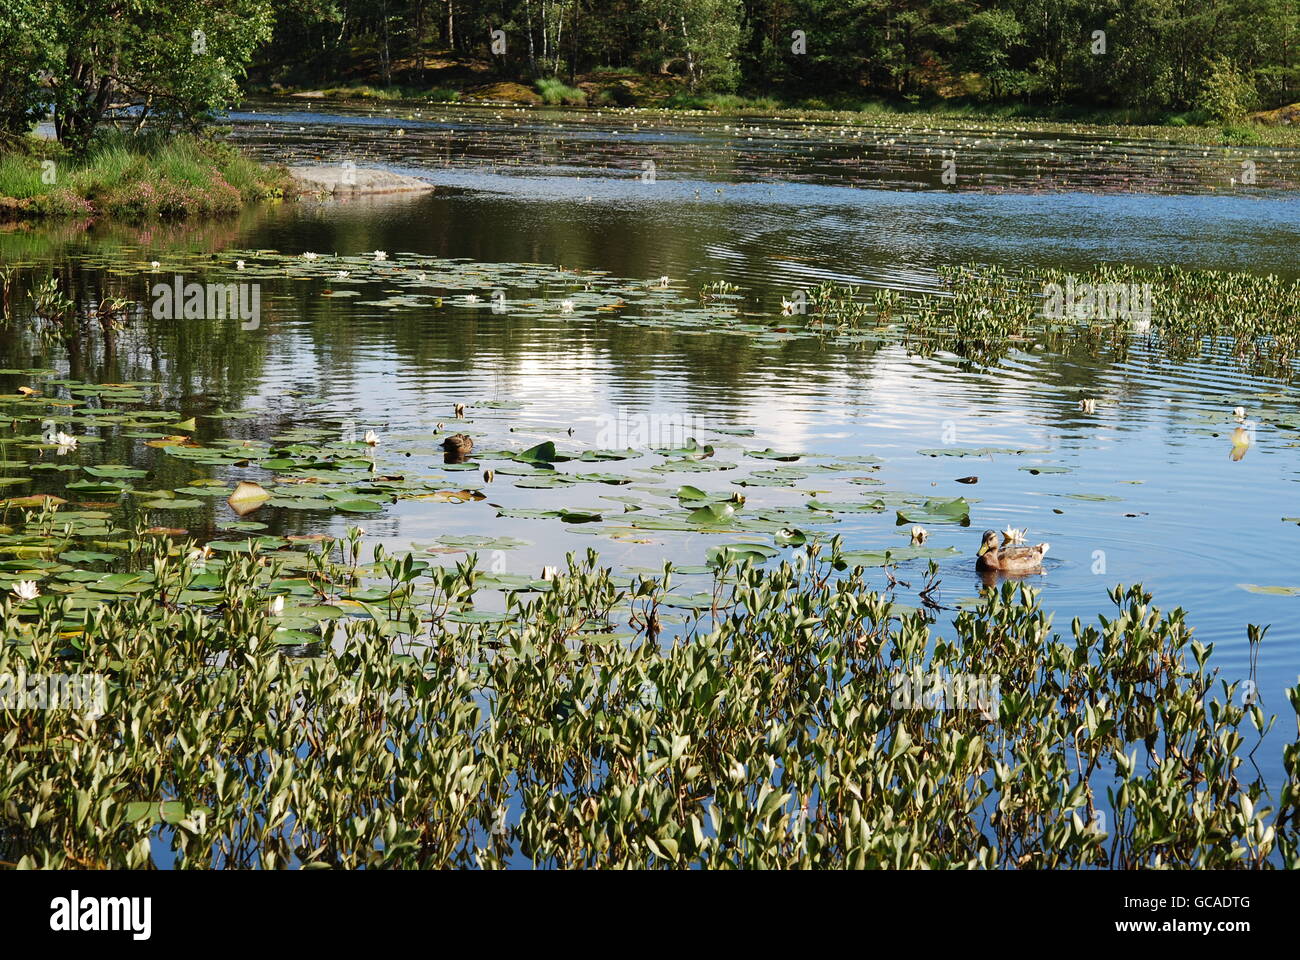 Large pond with water lilies Stock Photo